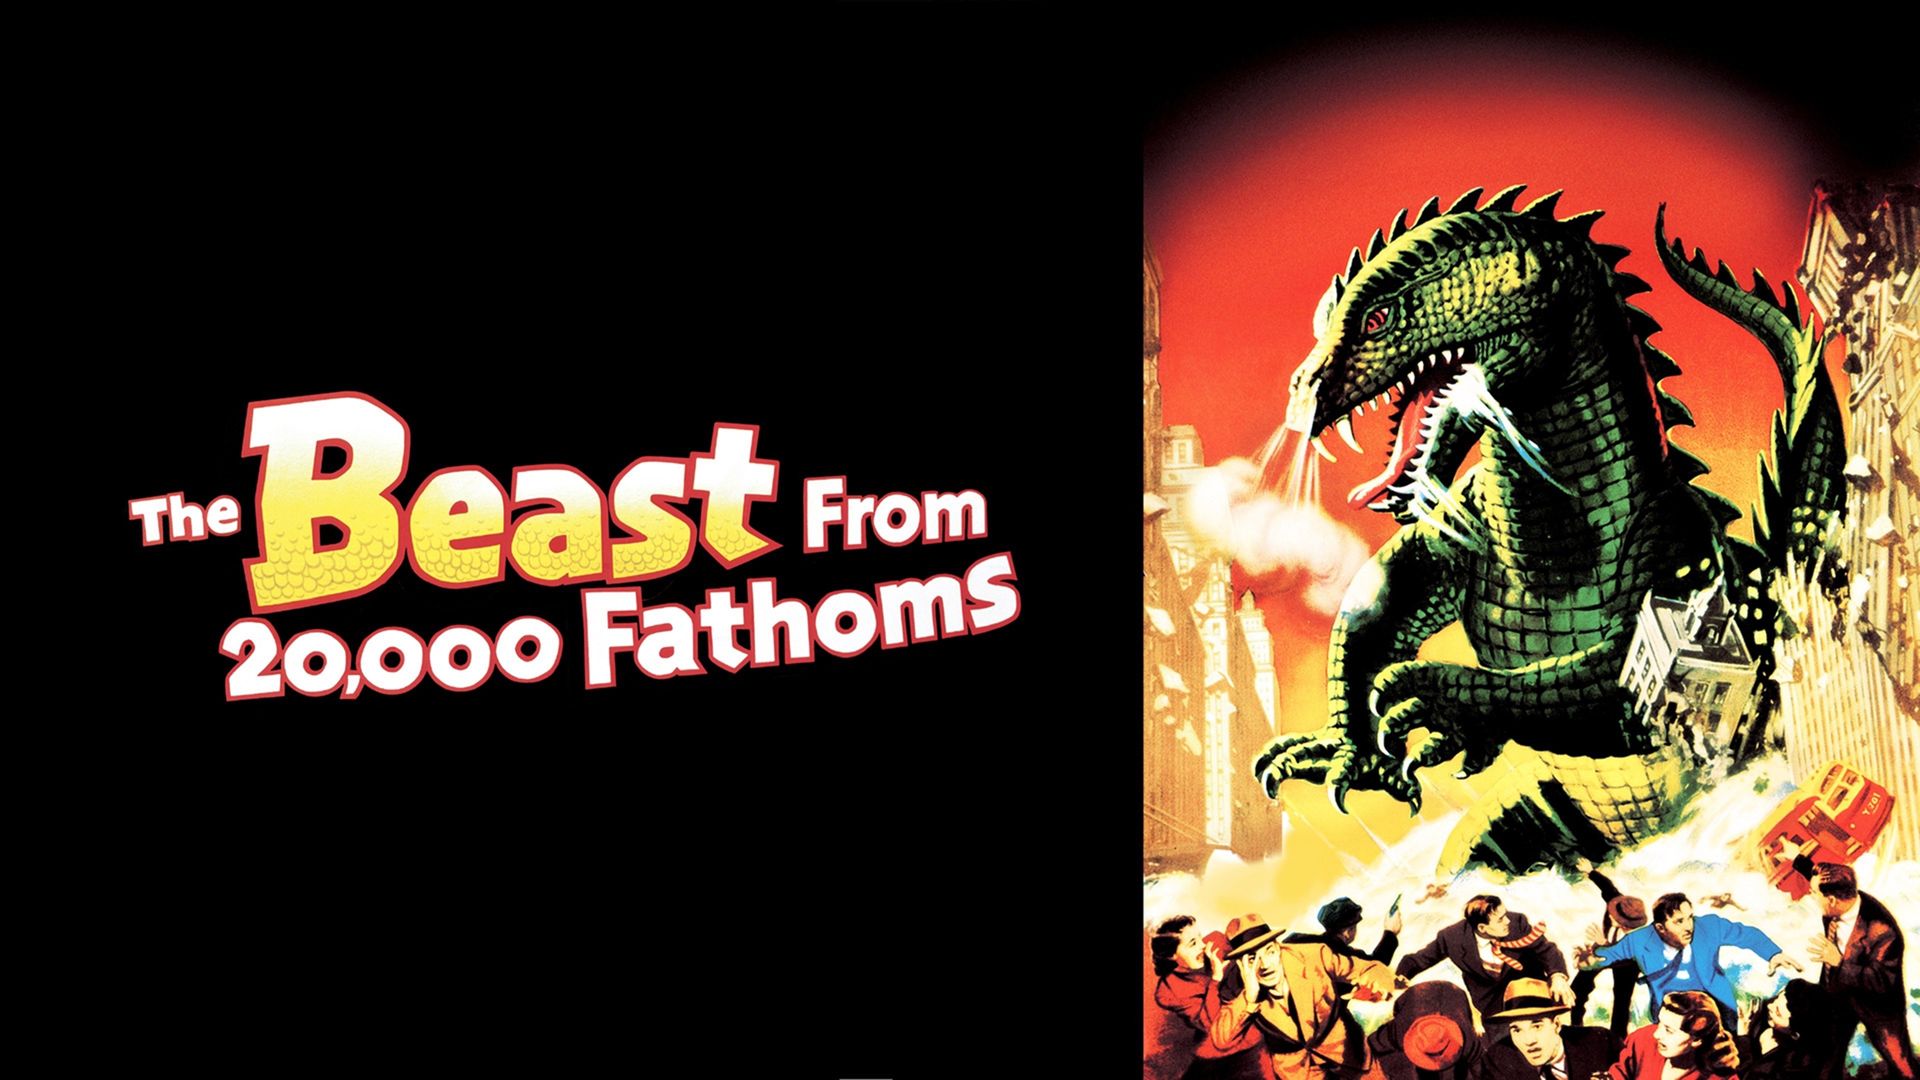 The Beast from 20,000 Fathoms Backdrop